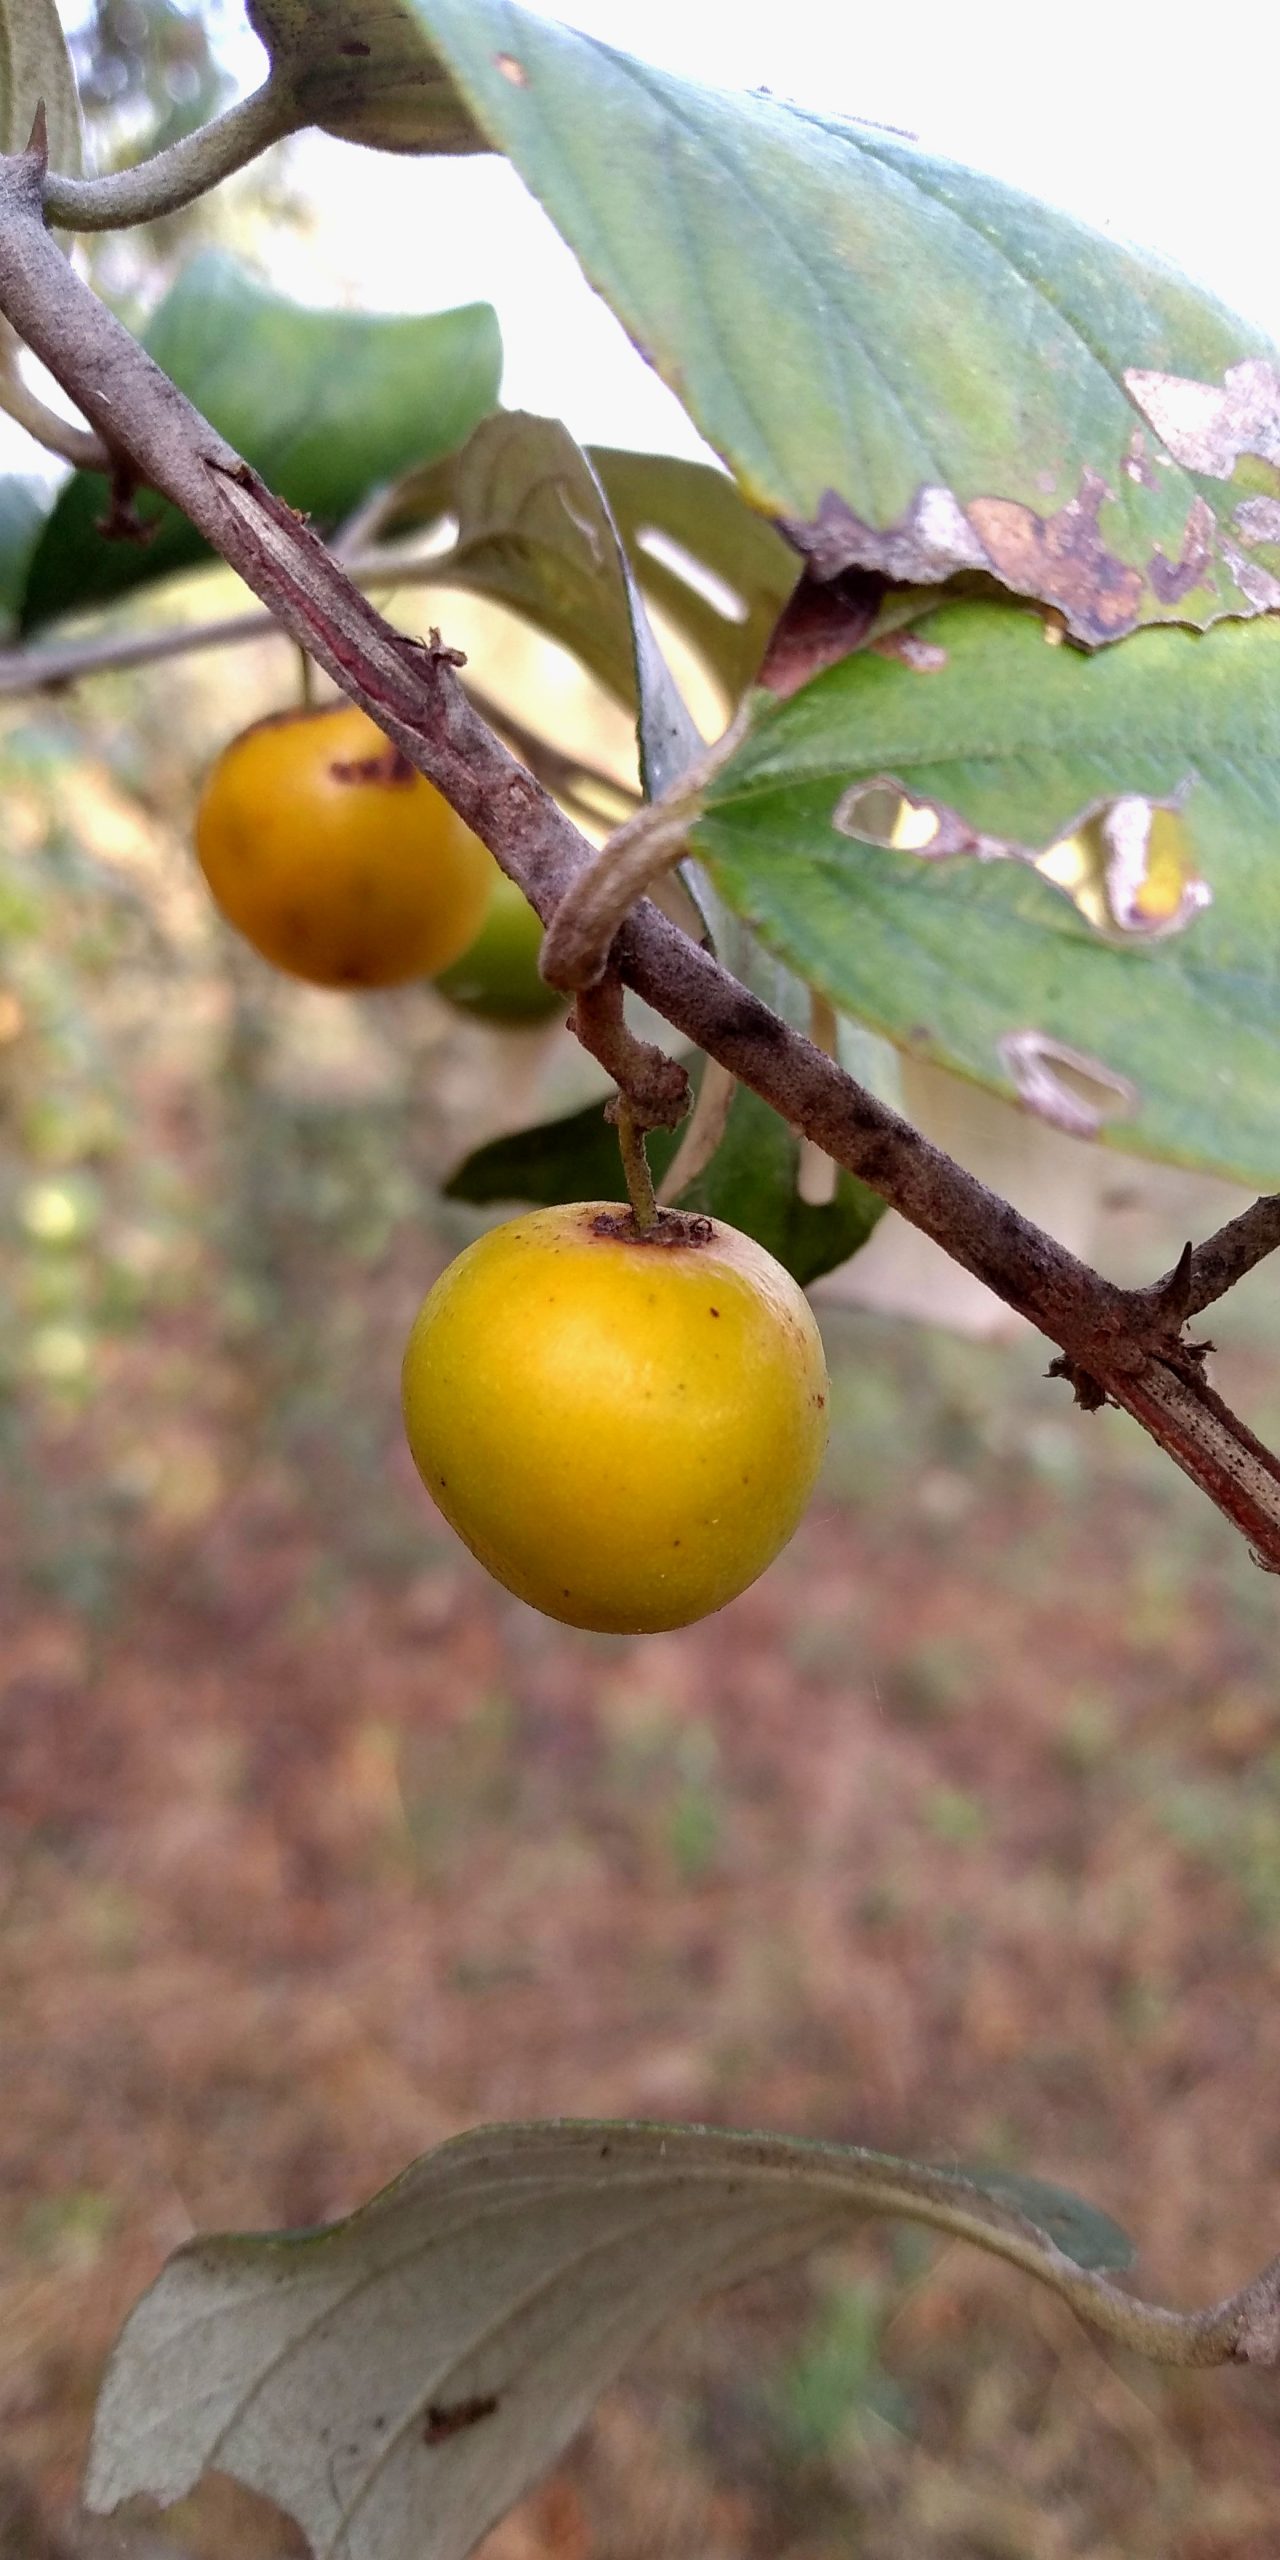 Indian jujube on its plant